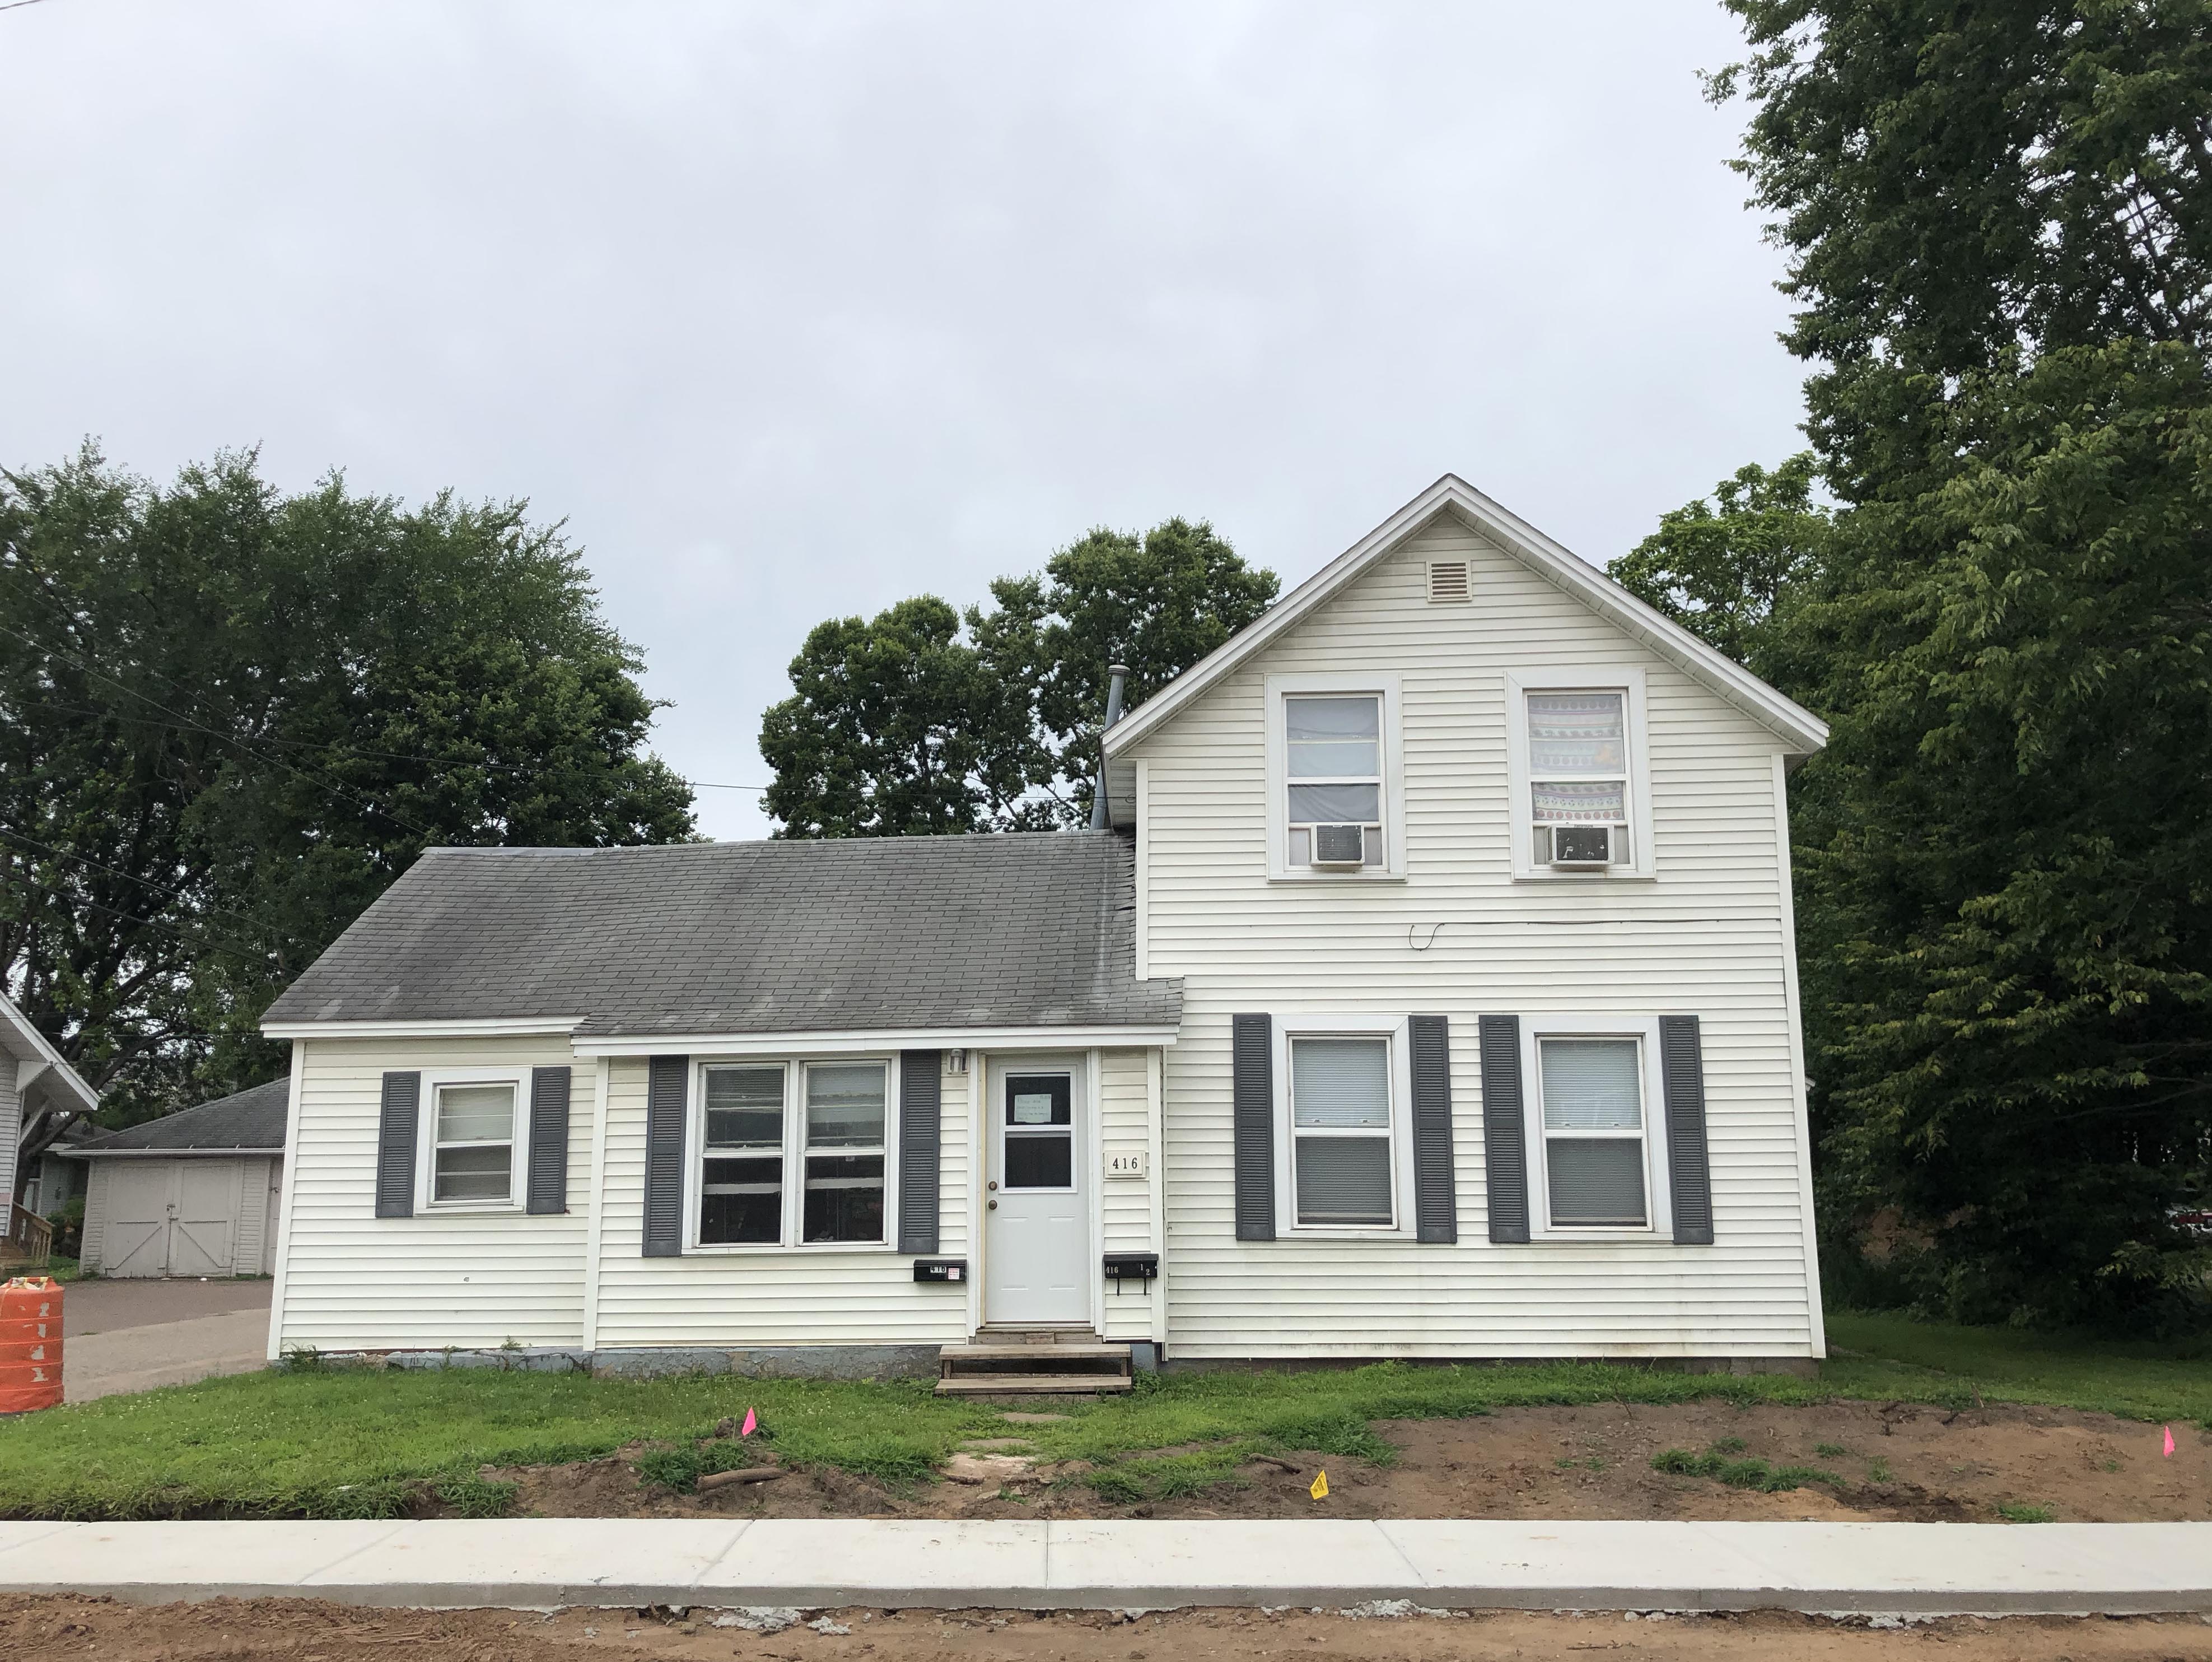 416 2nd Ave, Eau Claire, Wisconsin 54703, 3 Bedrooms Bedrooms, ,1 BathroomBathrooms,Multi-Family,Apartment,416 2nd Ave ,1060